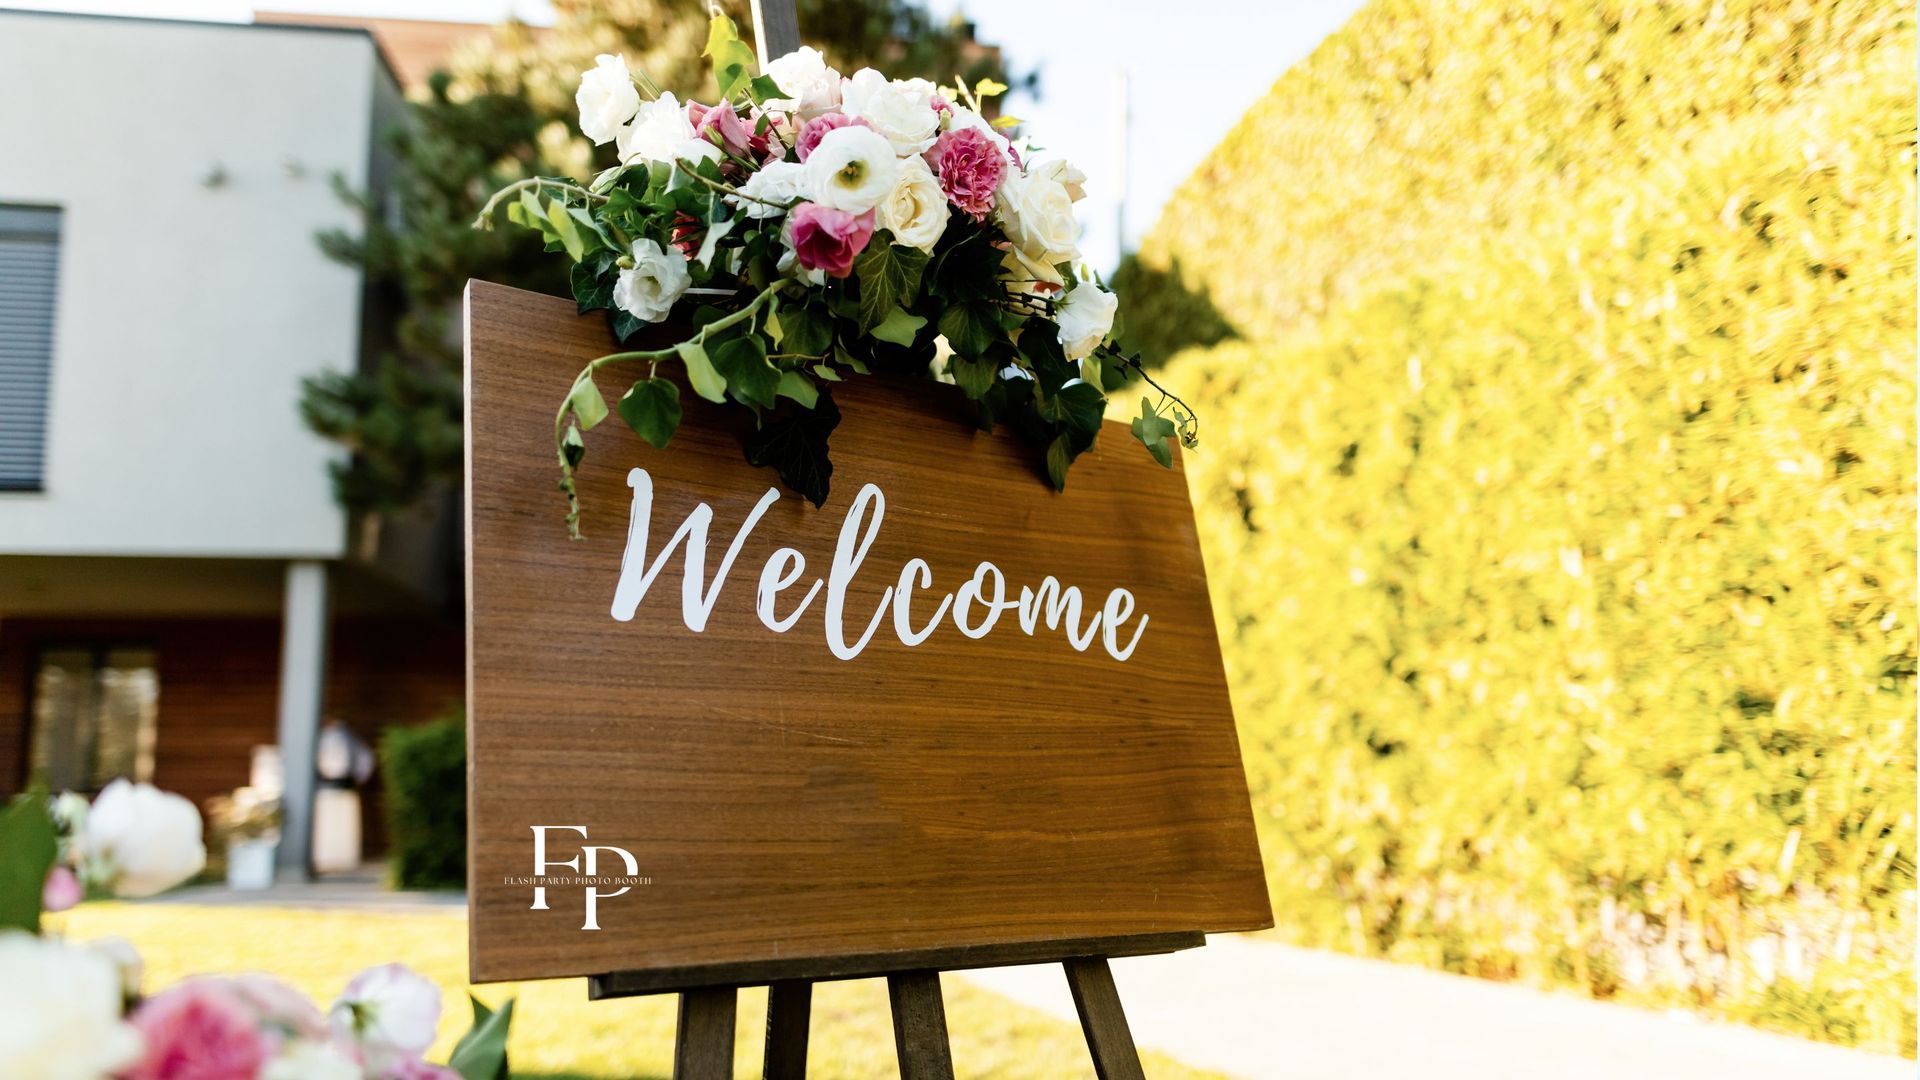 A welcome signage placed outside the wedding venue in Midland